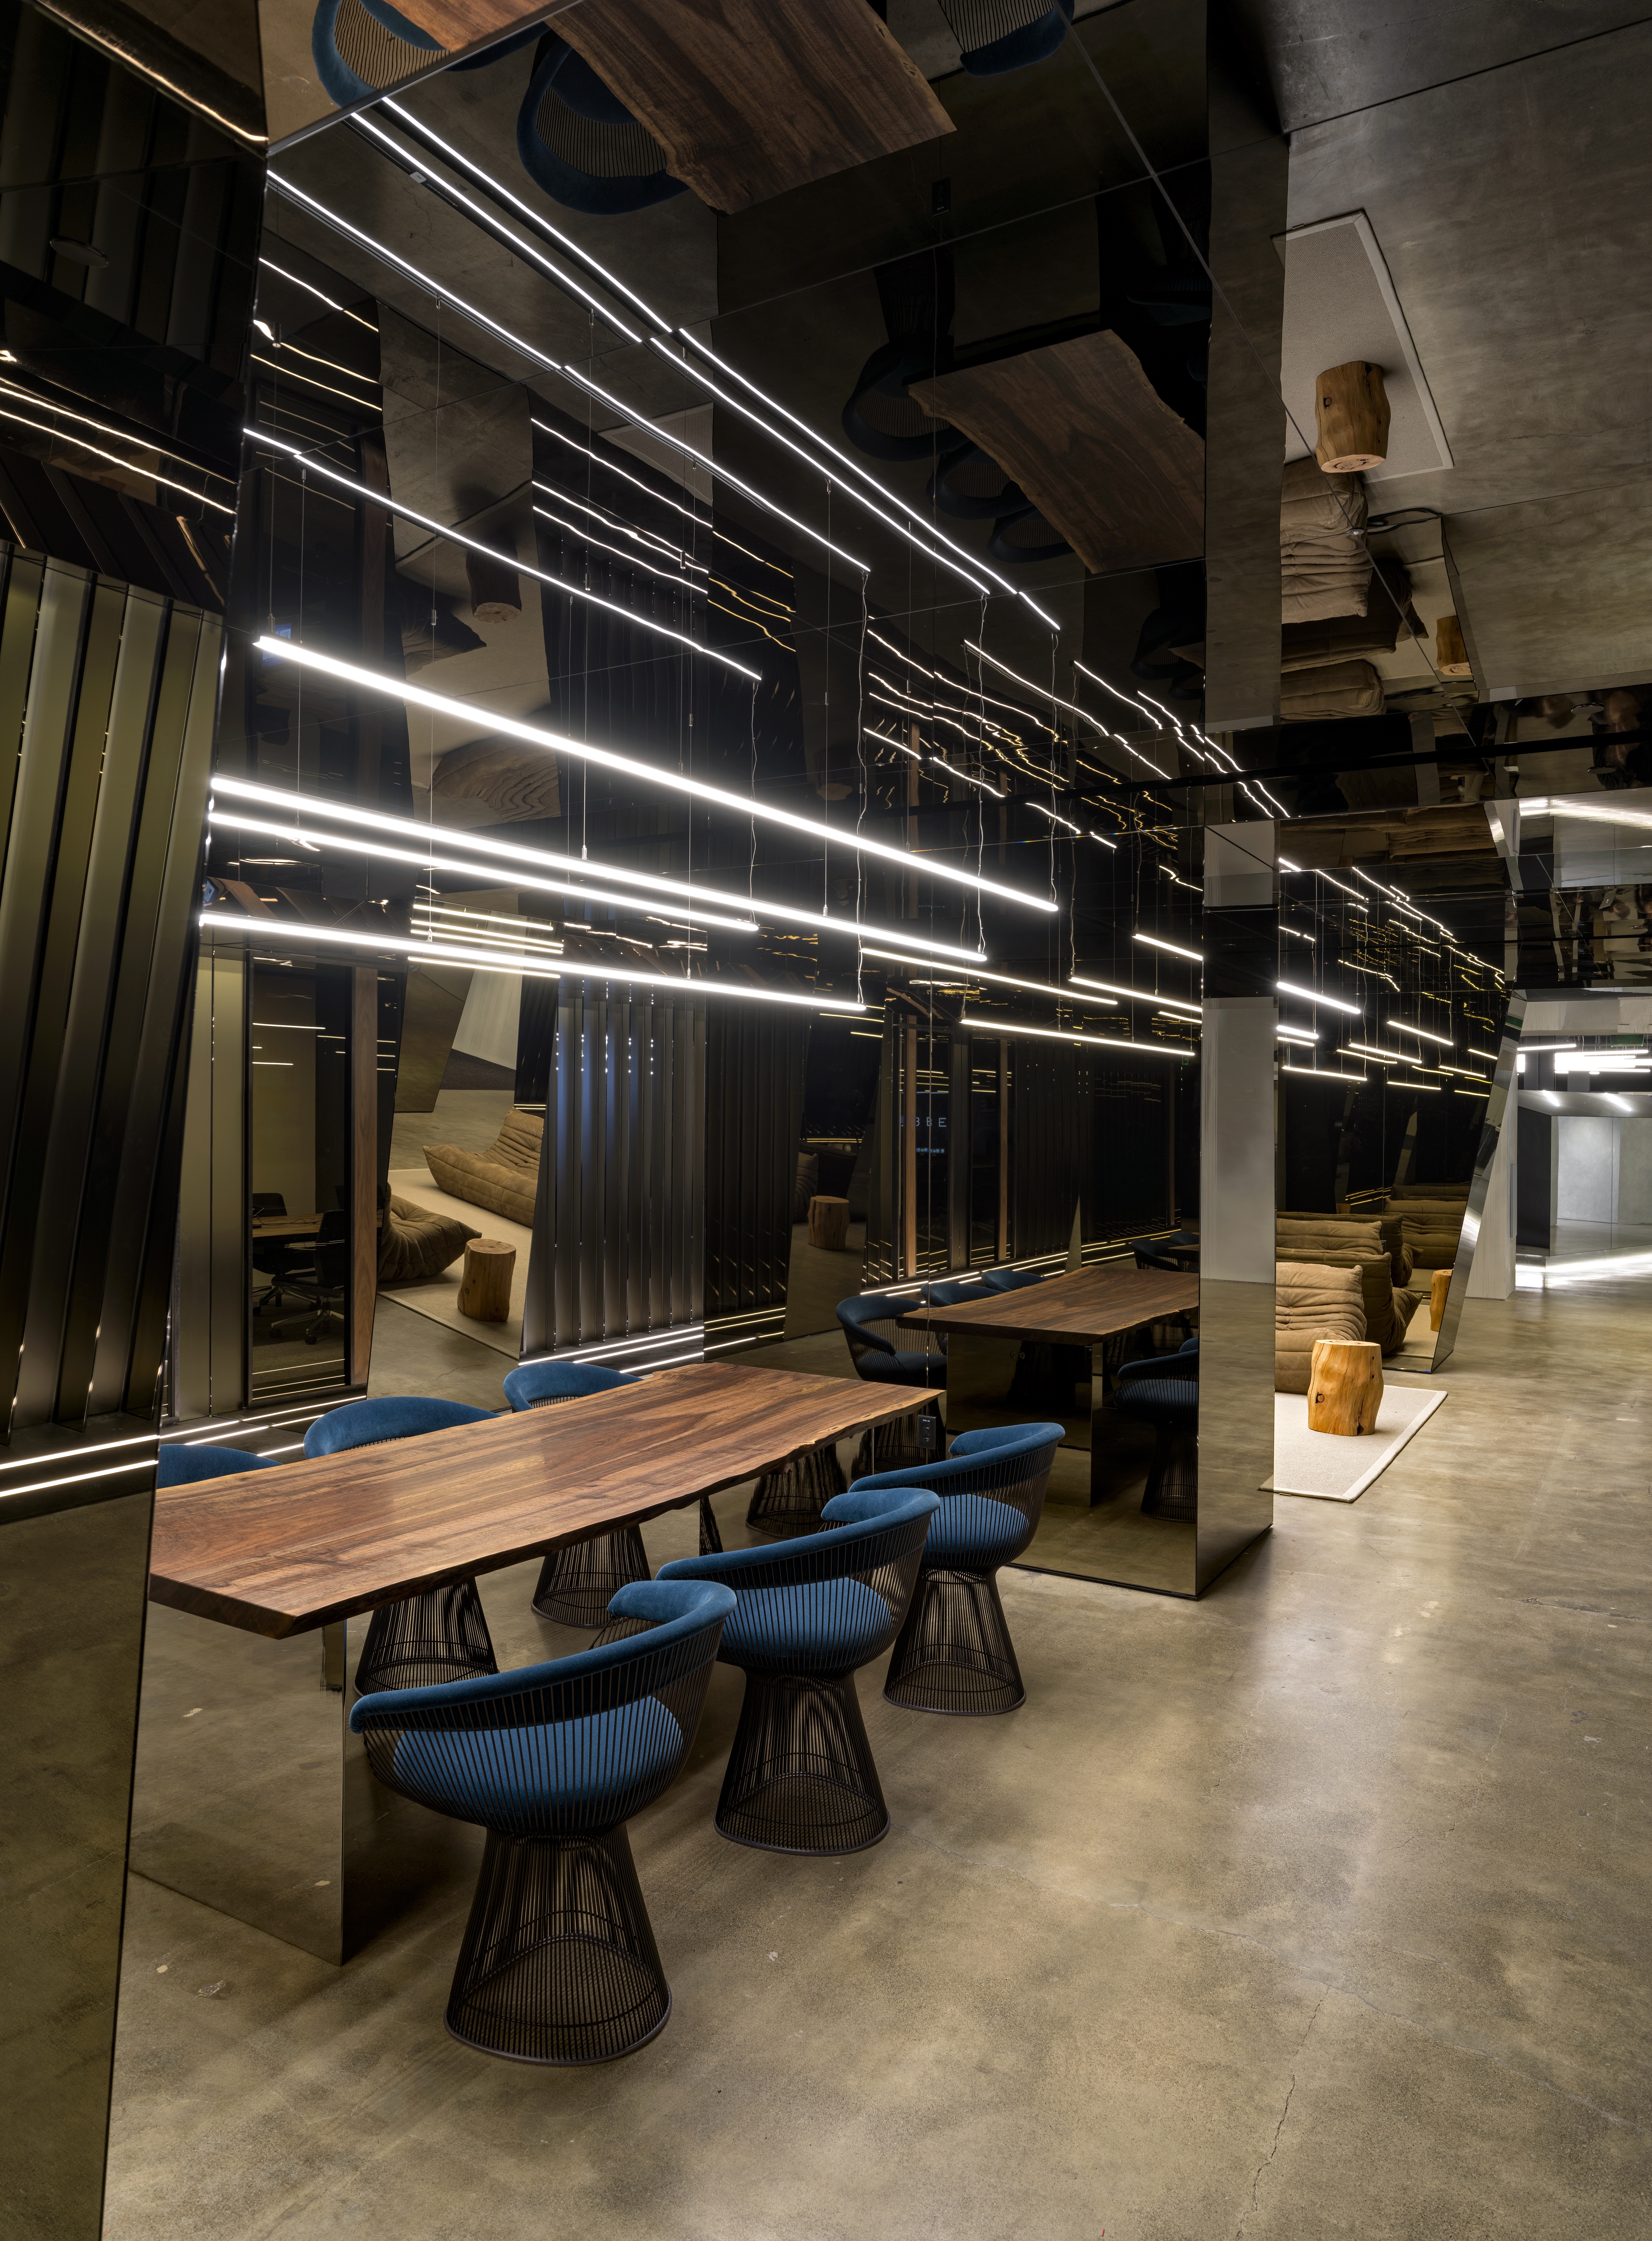 A photograph of the Uber headquarters with long LED lights hanging above a wooden table. The lights reflect off of the dark mirrored walls. The table has size low back dark turquoise chairs around it.